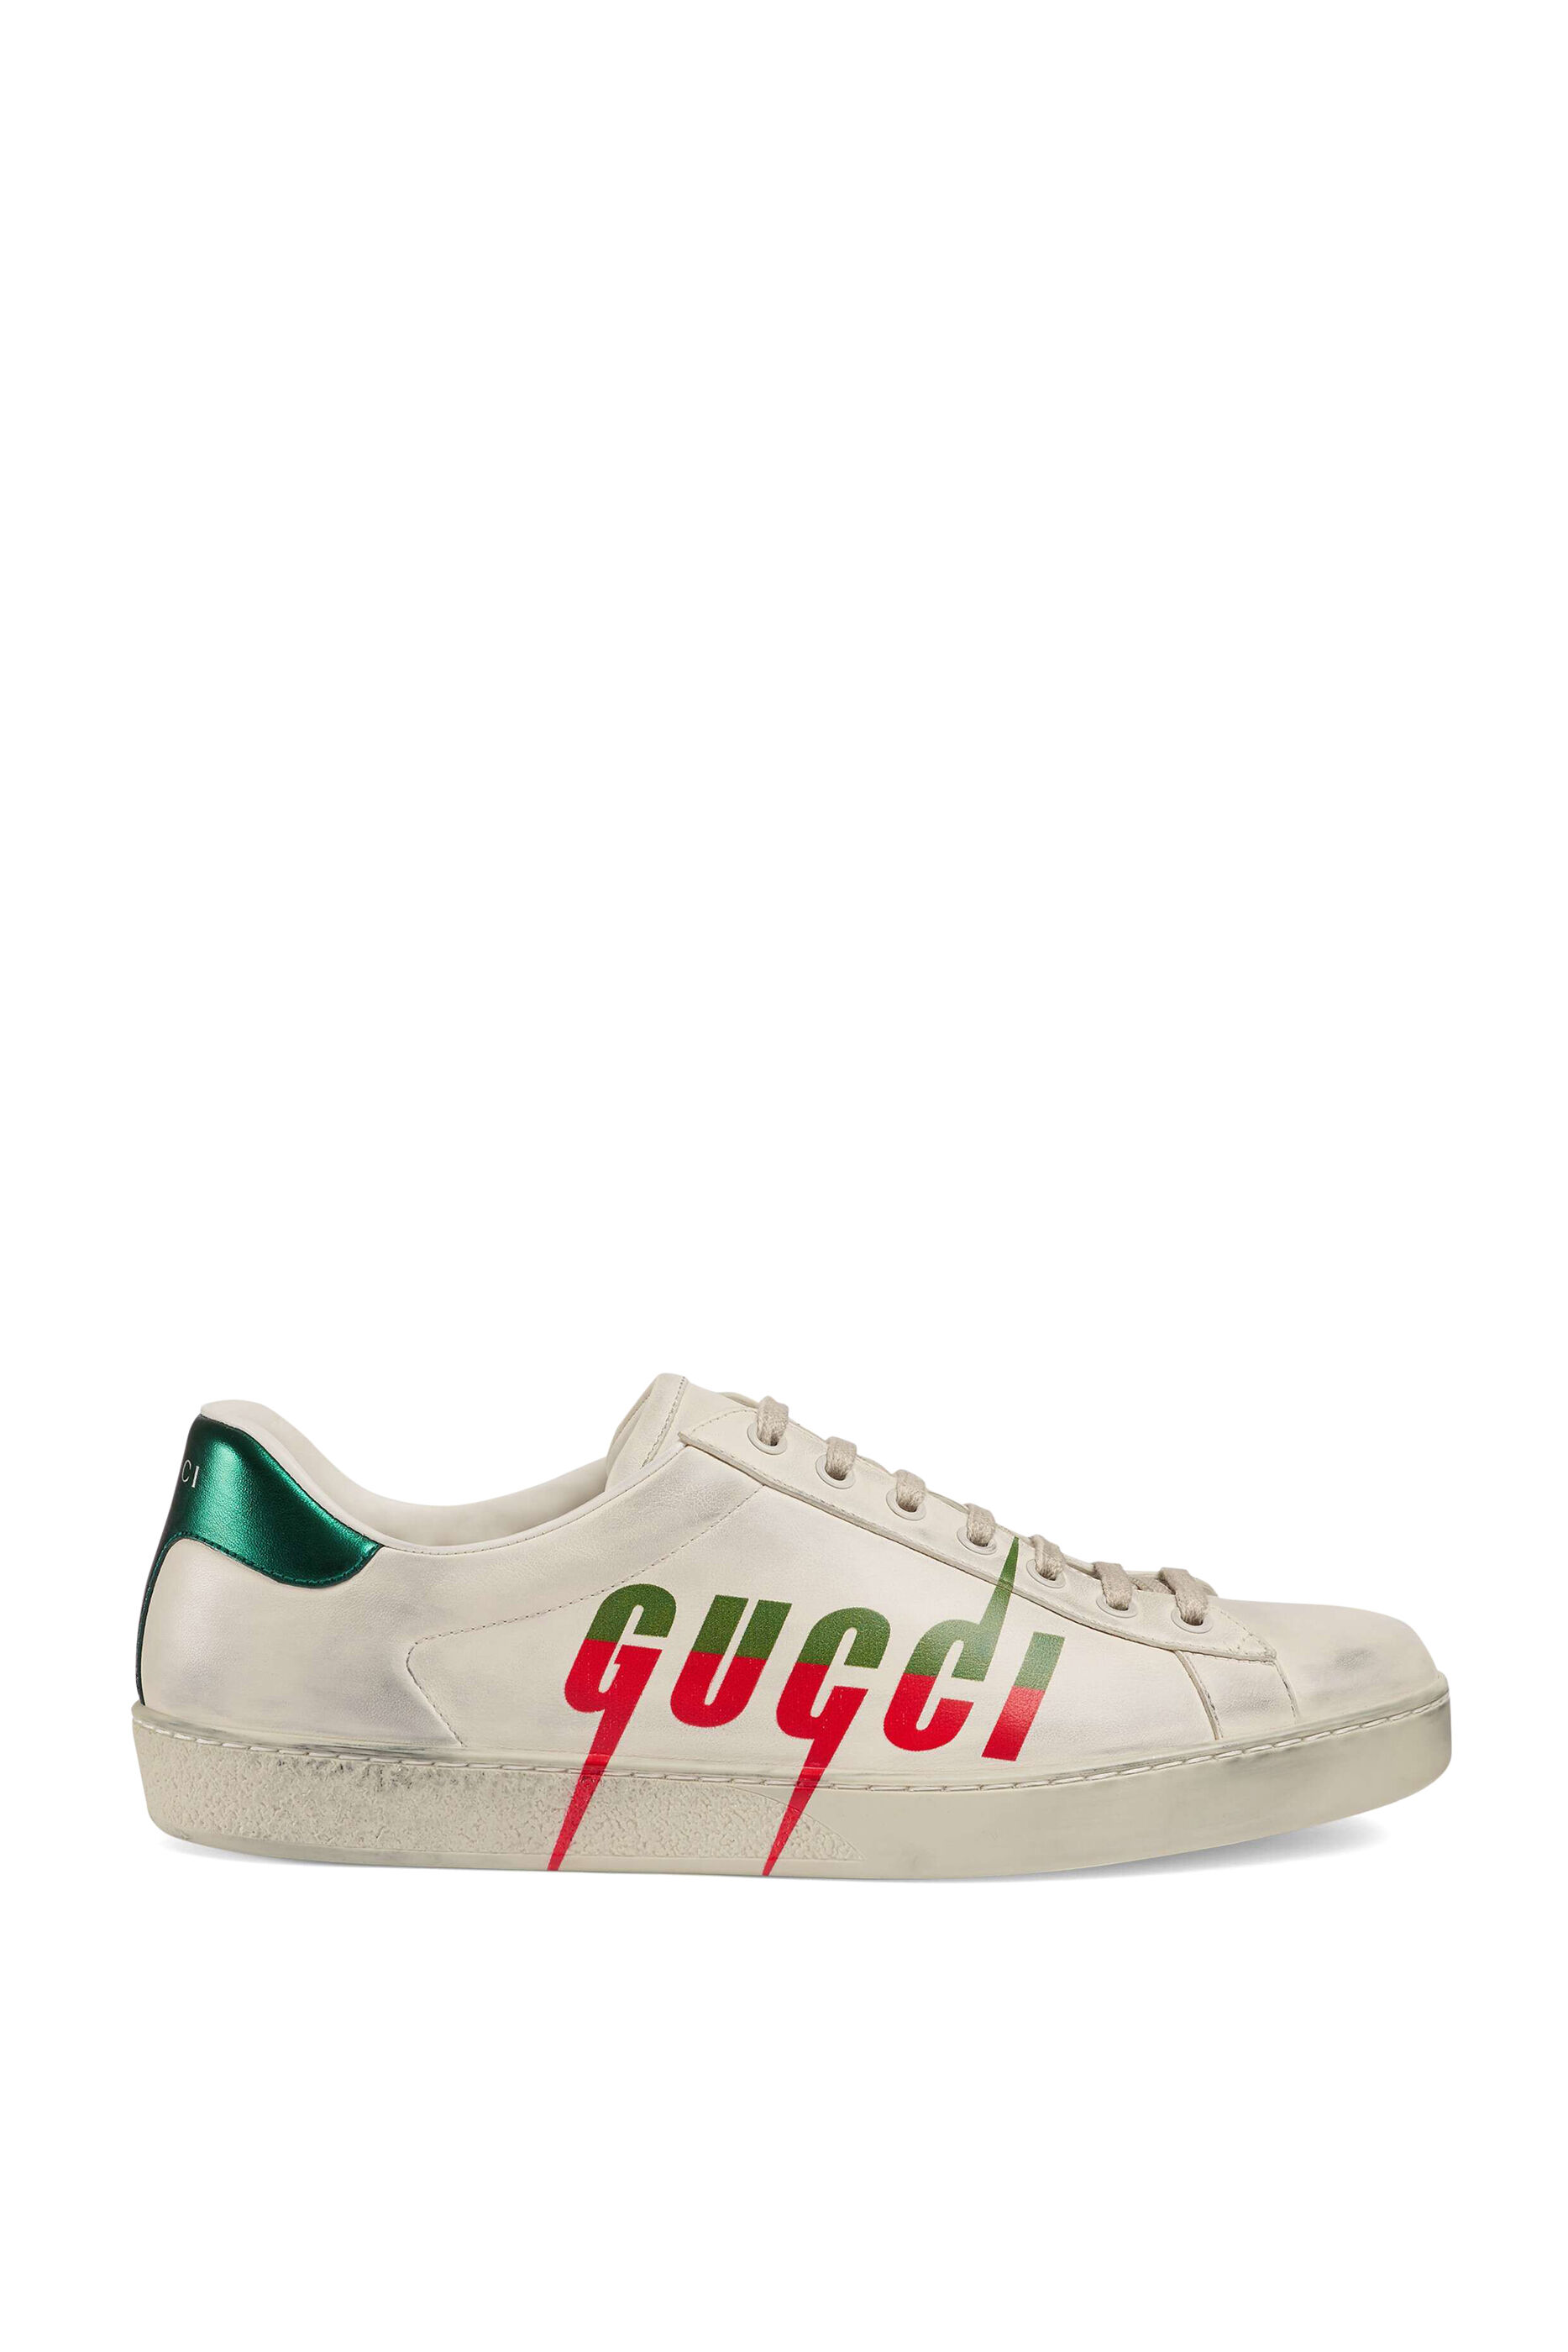 Bloomingdale's Gucci Sneakers Outlet, SAVE 54% 